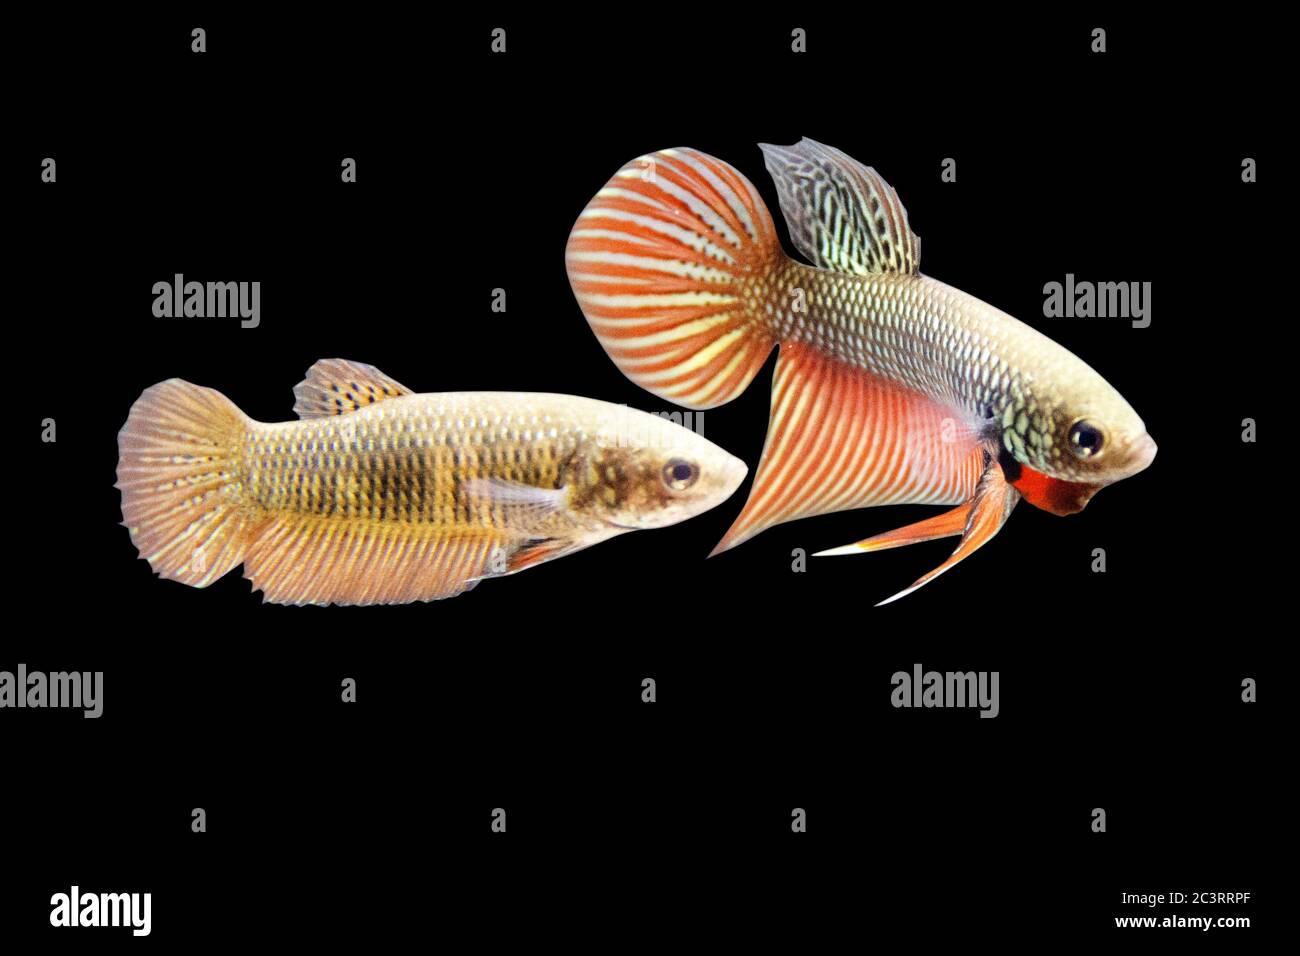 Betta Wild Smaragdina Ladiges Copper Male and Female or Plakat Fighting Fish Splendens on Black Background. Stock Photo